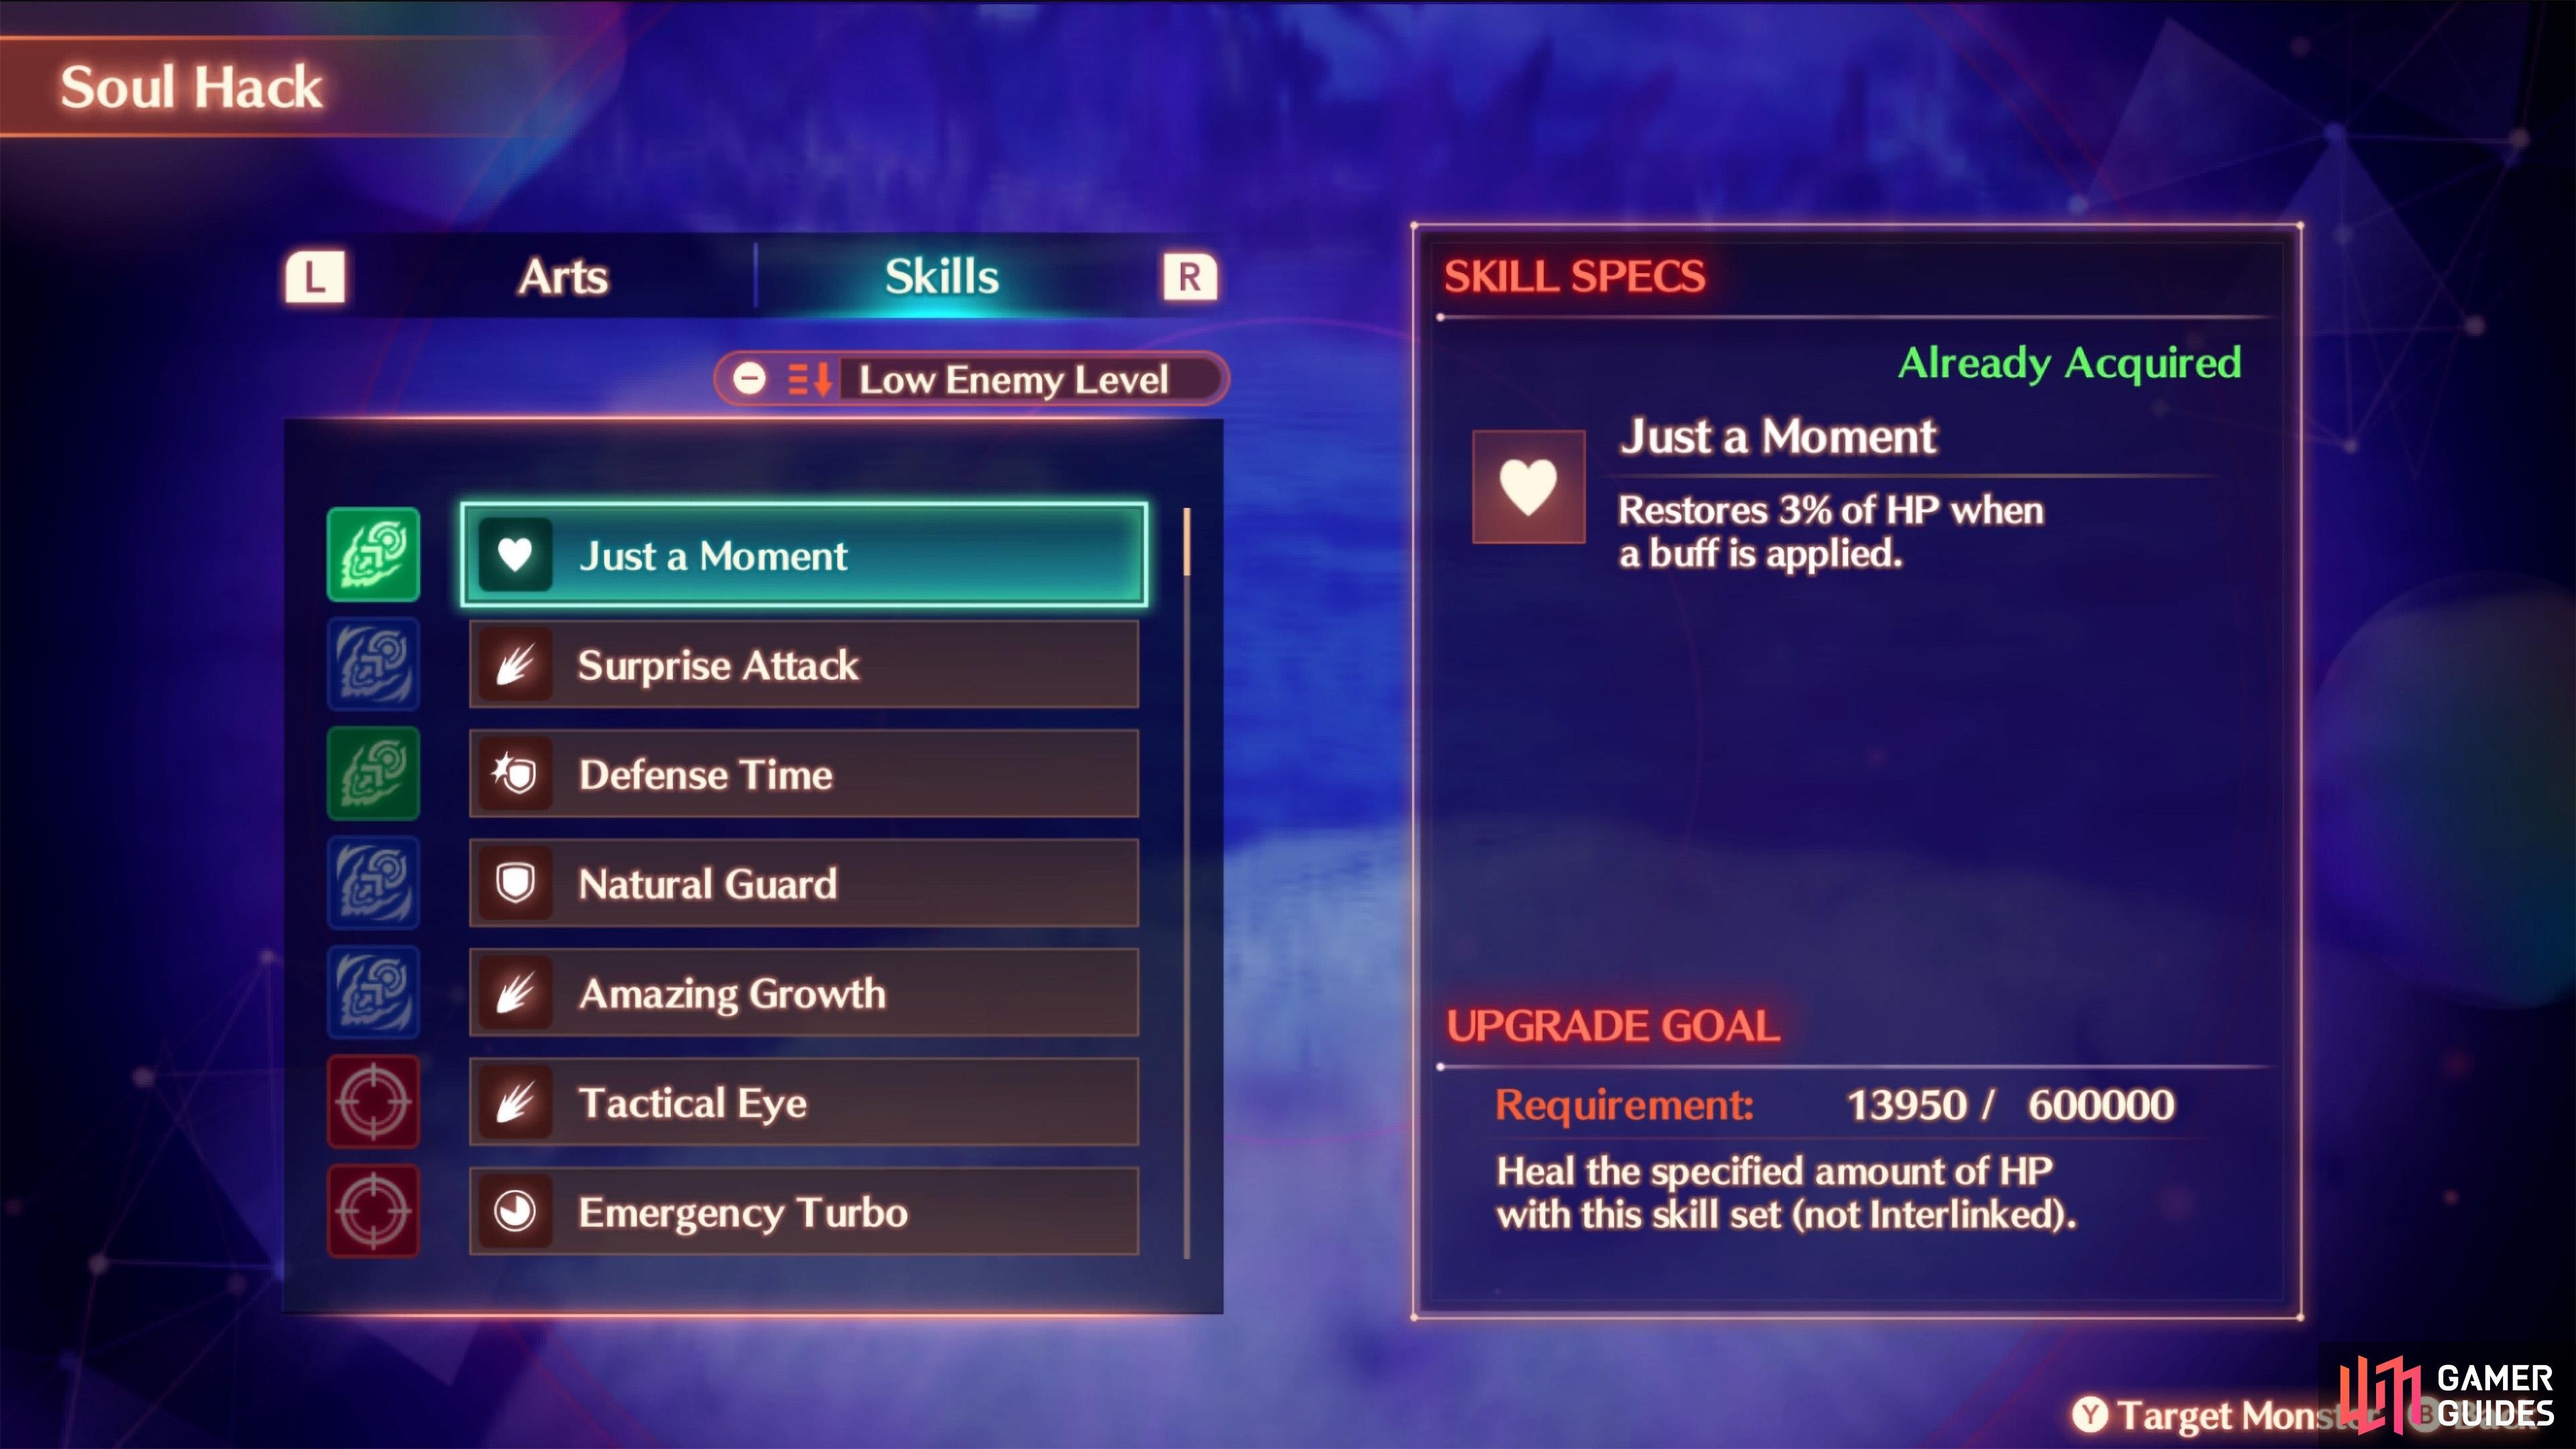 You can access the Skills menu by going to Heroes > Soul Hack List (Y) > Skills (R).